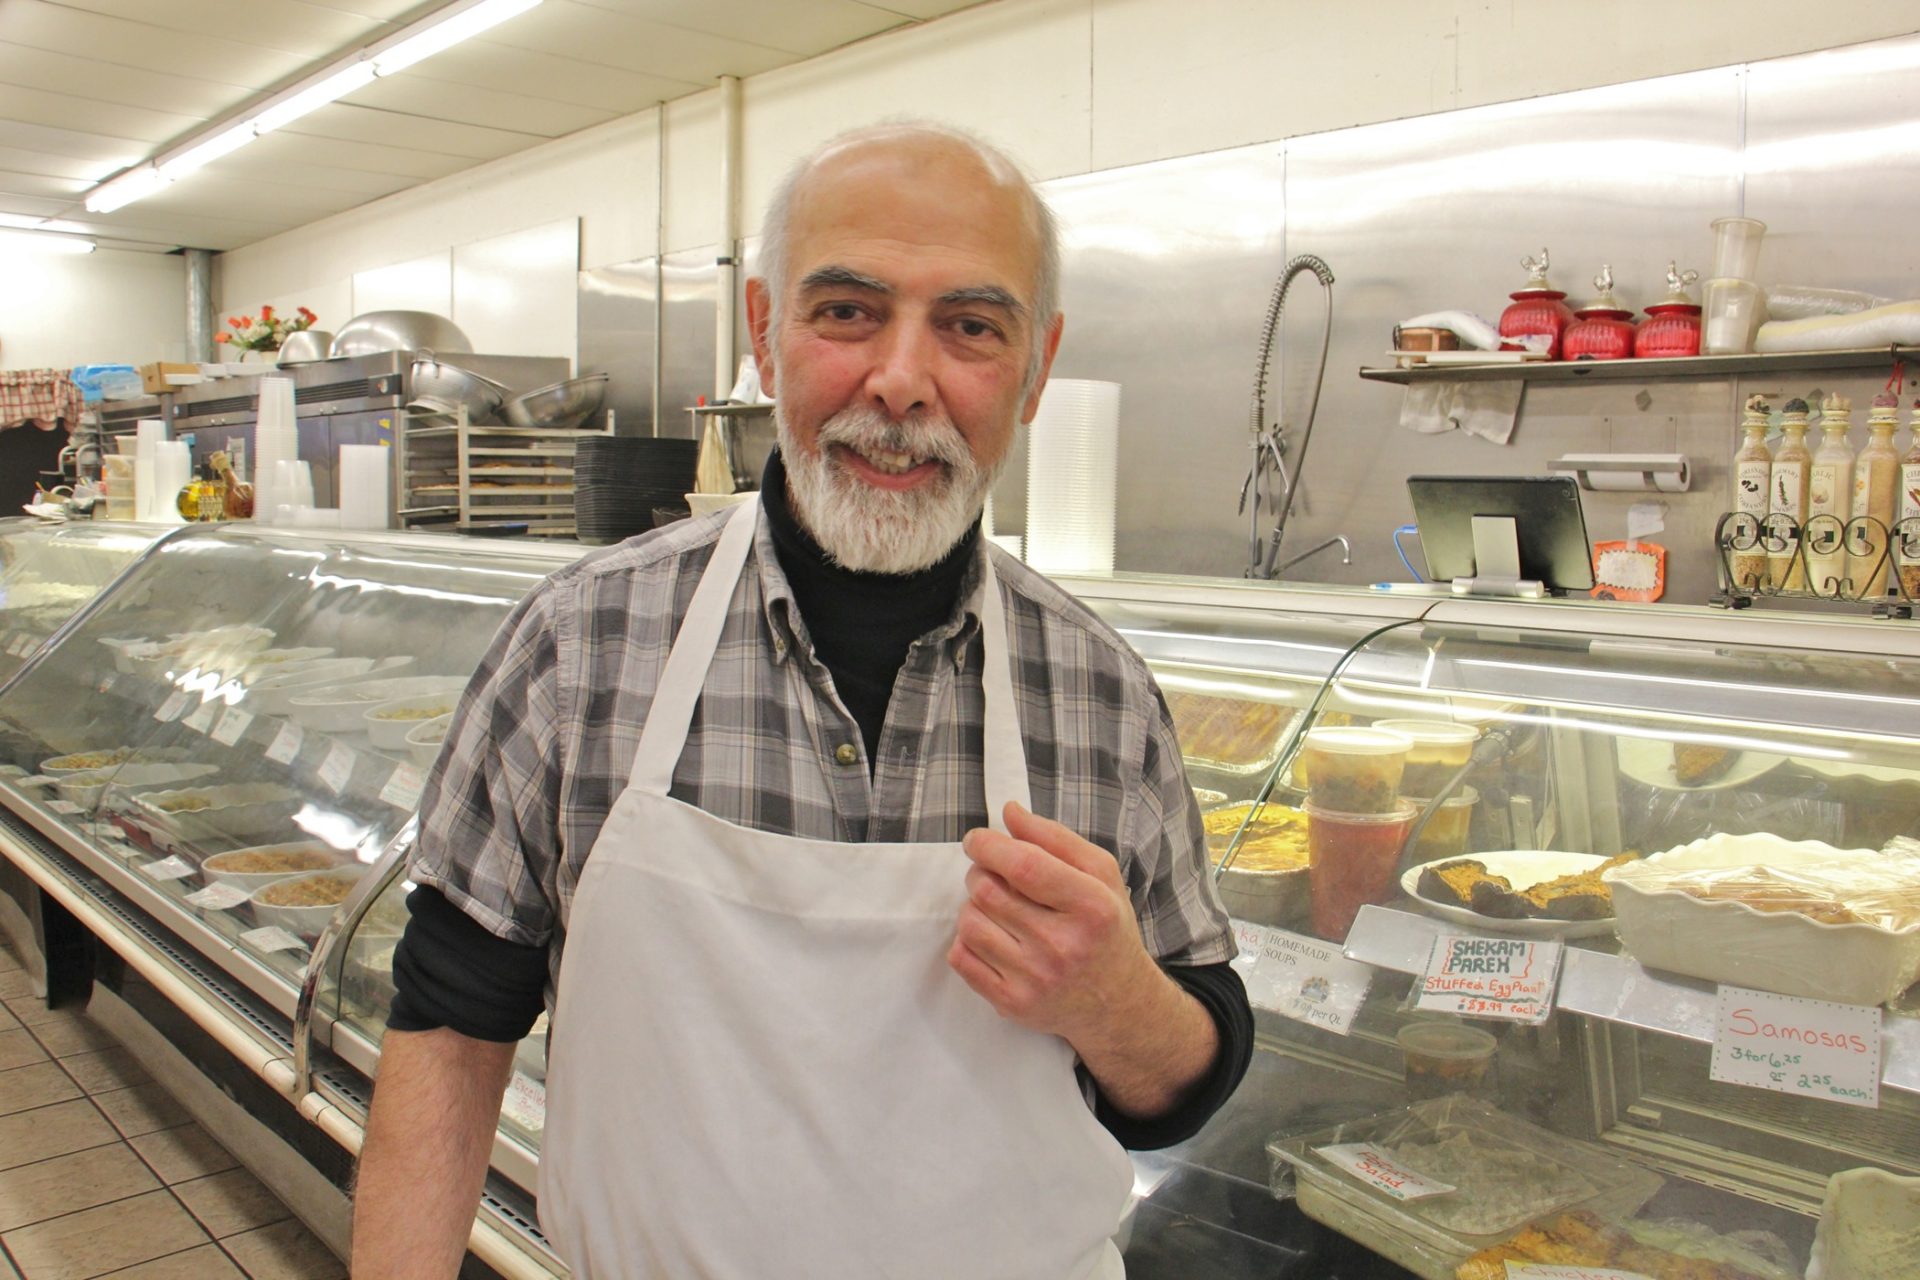 Fredoun Rashidian, 67, proprietor of the Caspian Grille in Lafayette Hill, came to the United States from Iran in 1979.